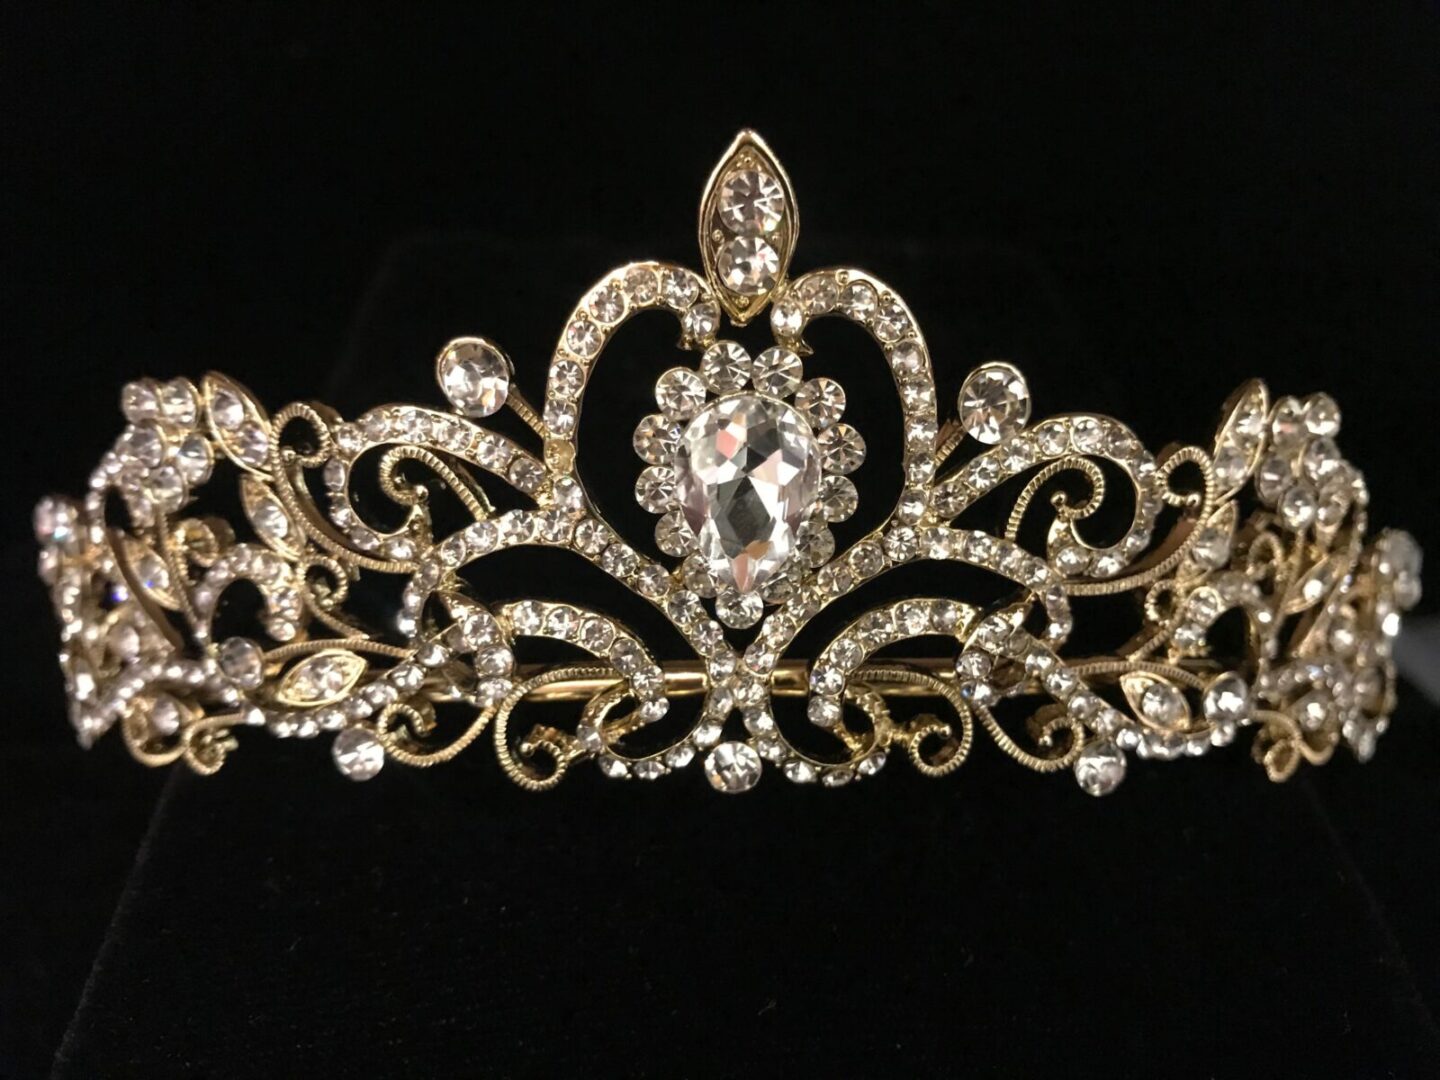 A gold and crystal tiara on a black background.